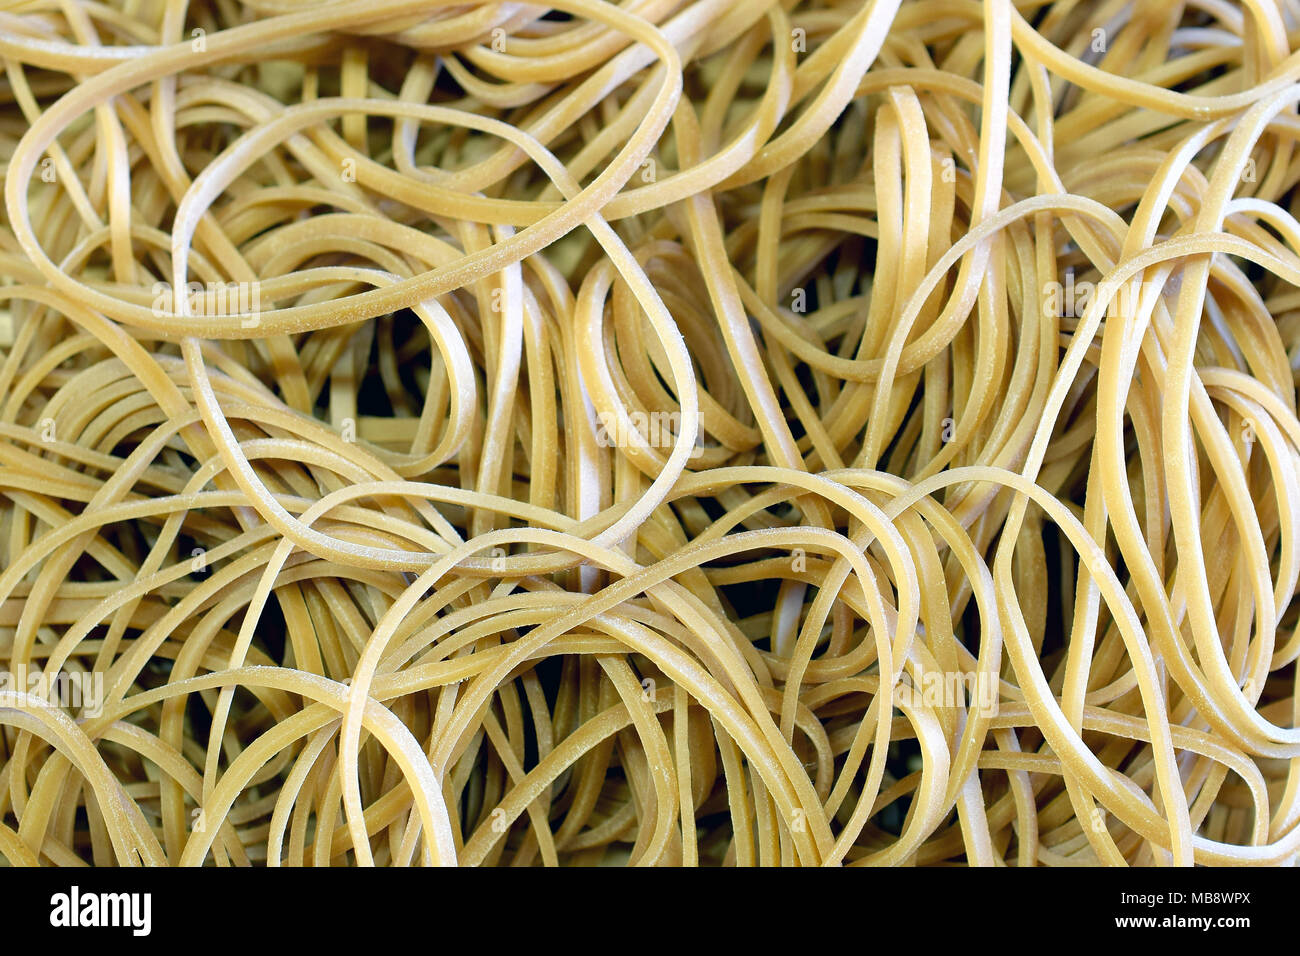 Rubber bands background Stock Photo